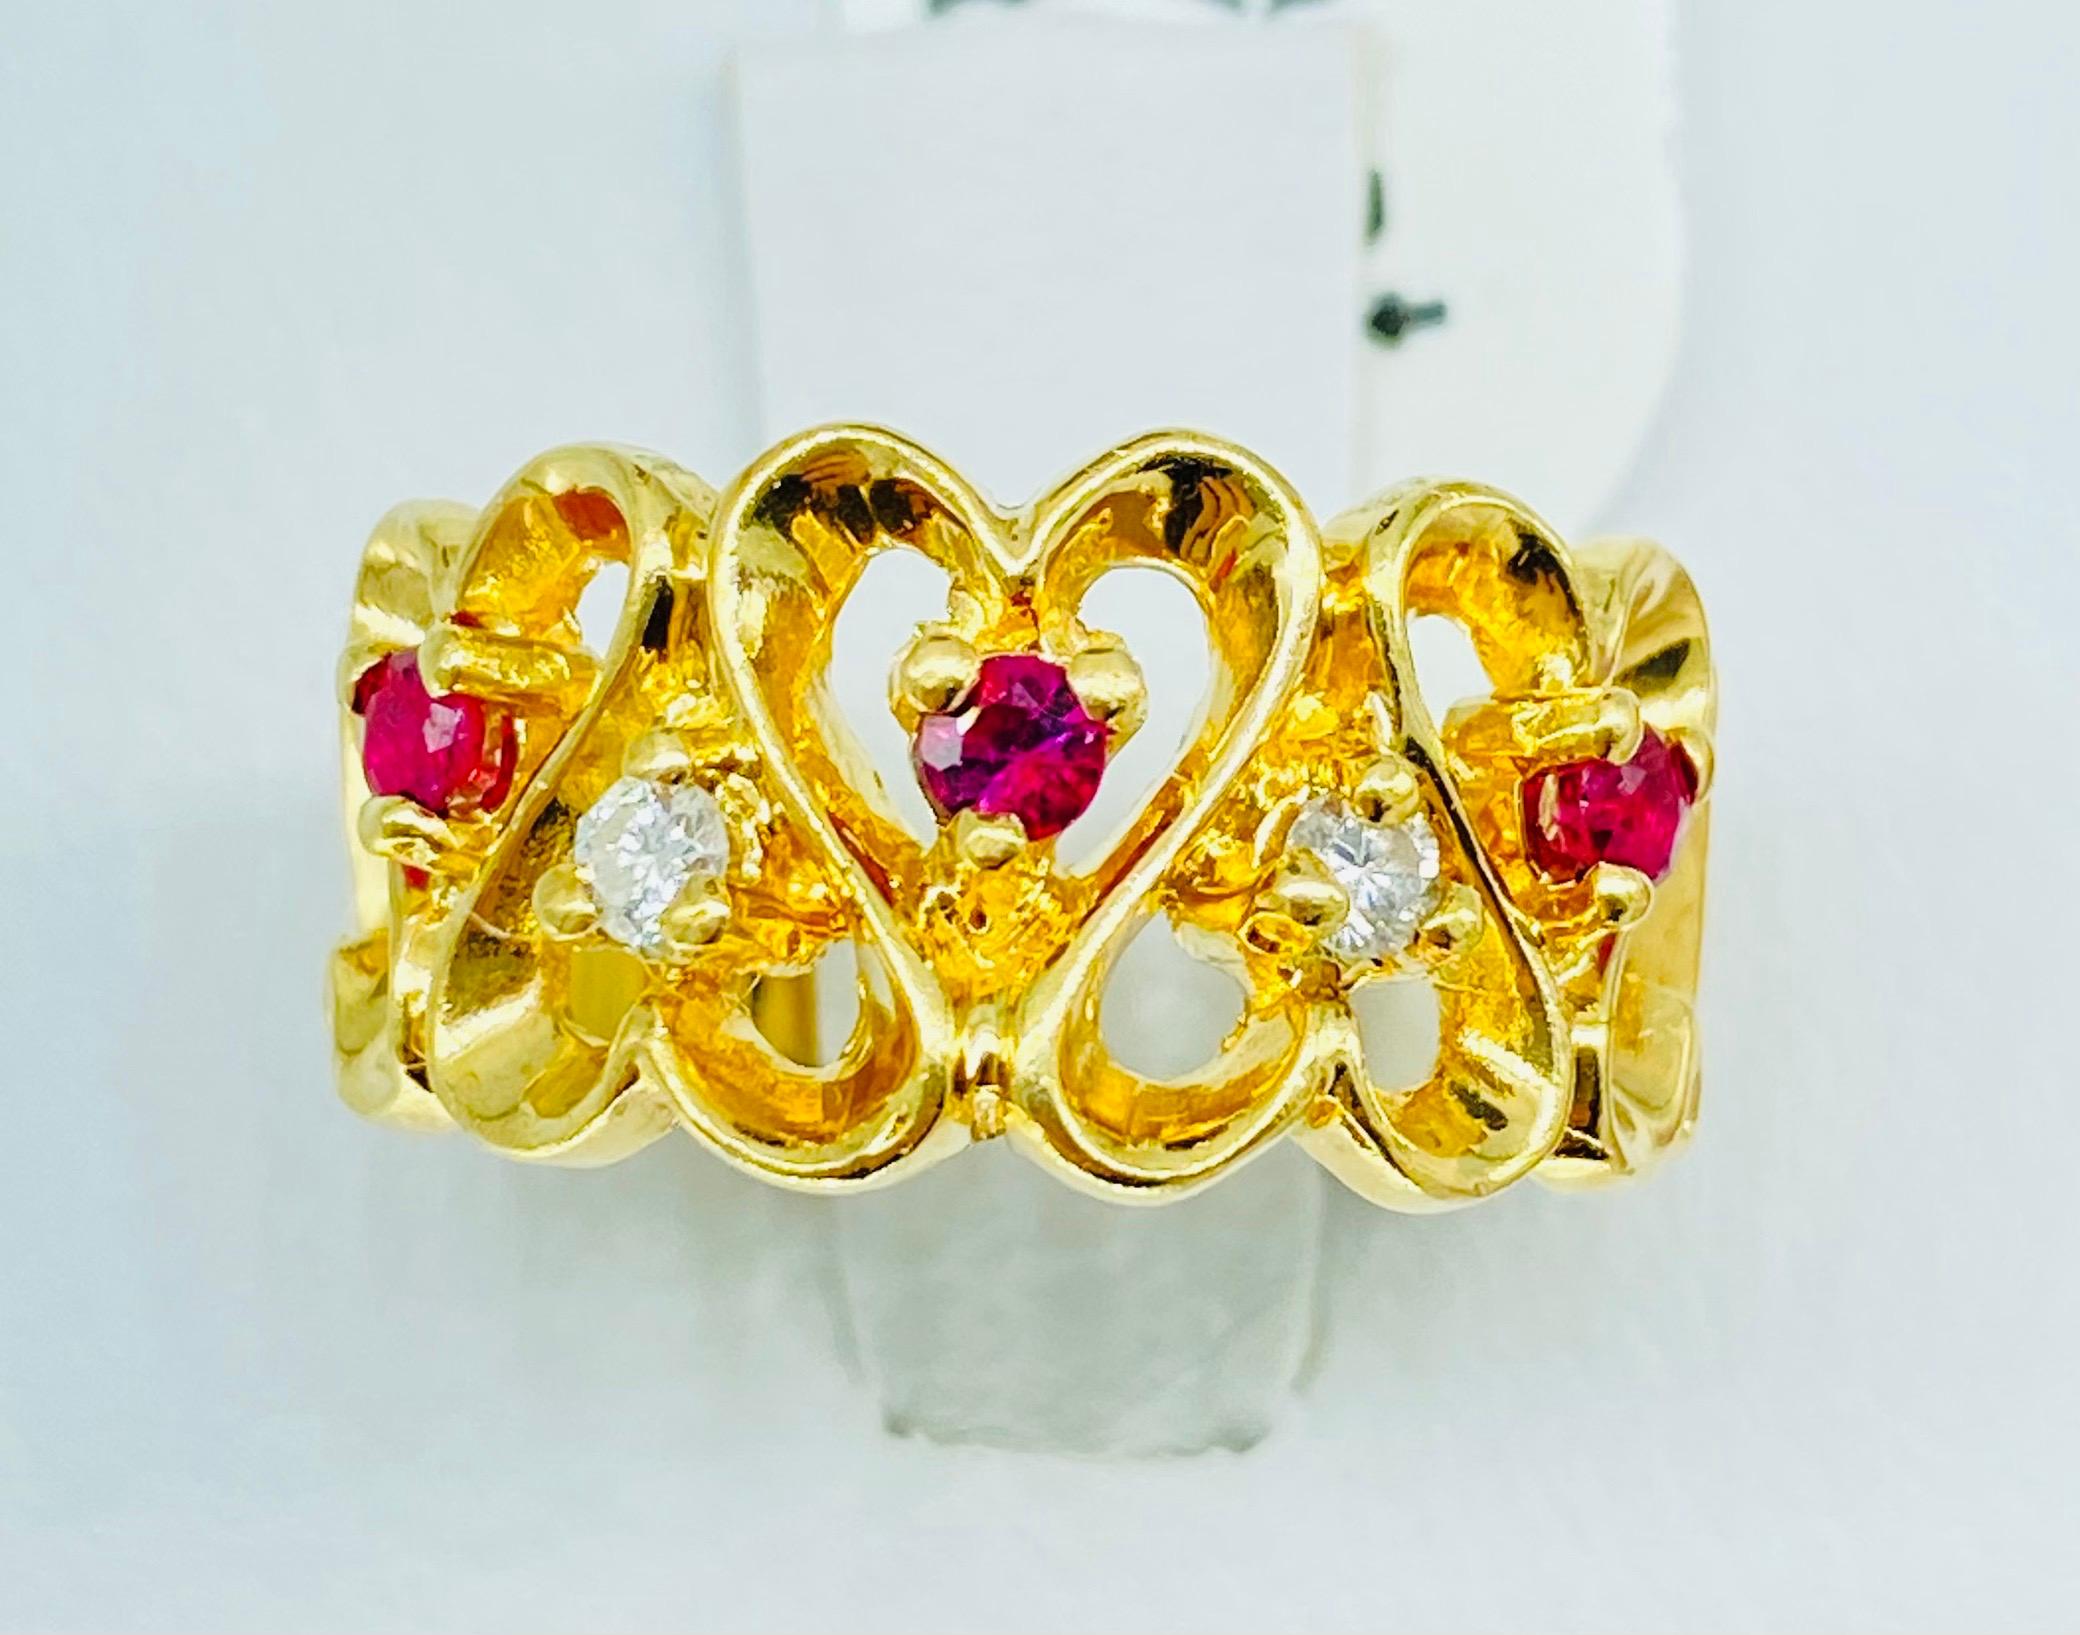 Vintage 0.25 Carat Ruby & Diamond Connected Heart Ring 14k Gold. Beautiful design throughout very high quality details showing hearts connecting with diamonds and ruby gemstones in the center of each heart. The ring features 0.25 total carat weight